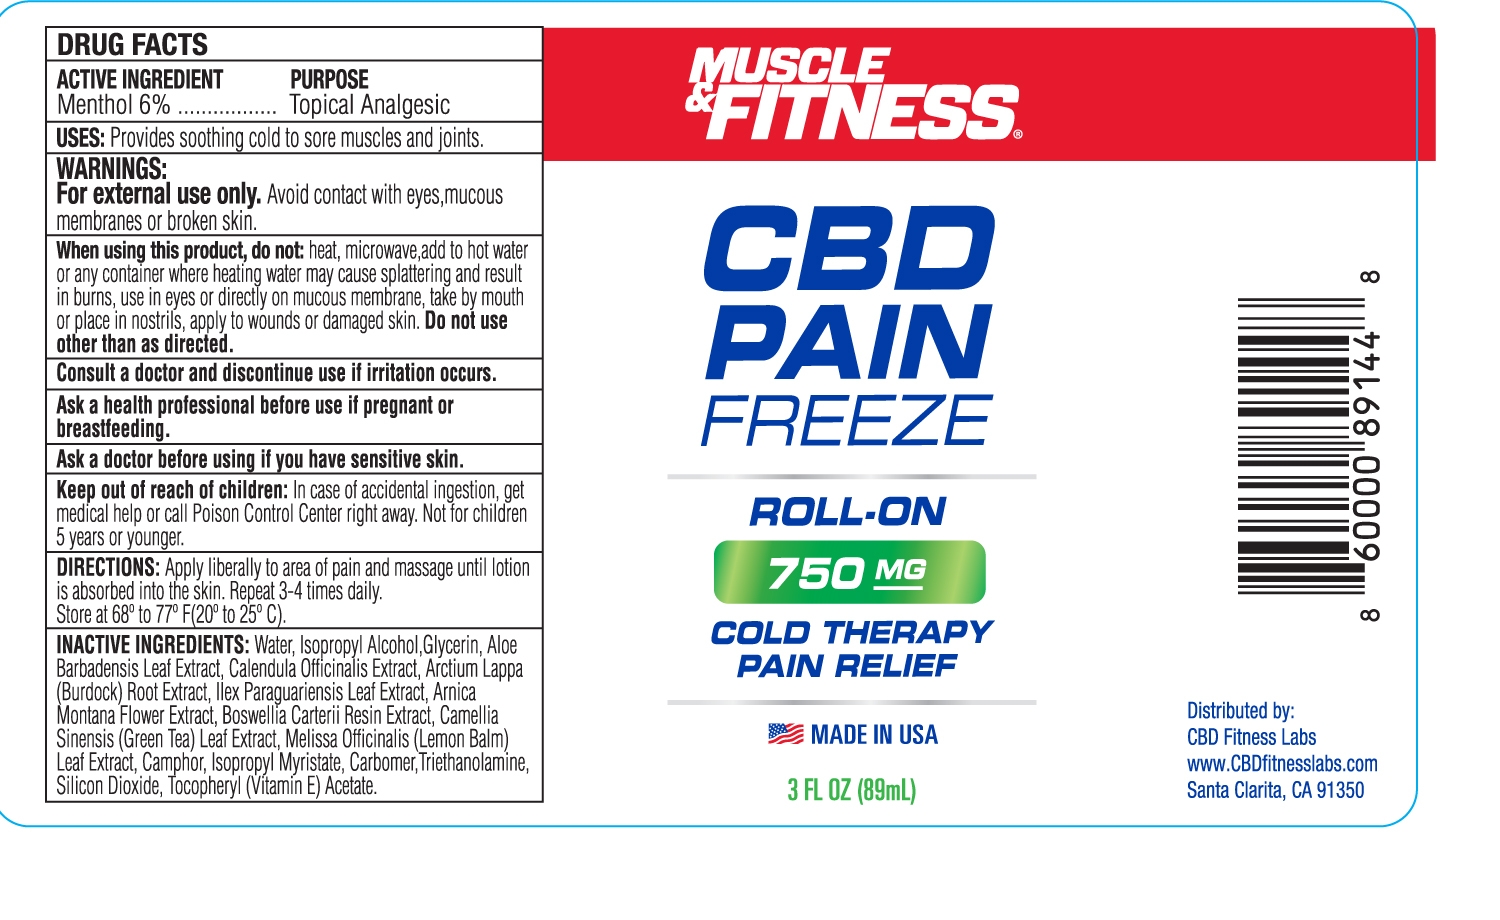 Pain  Freeze roll-on